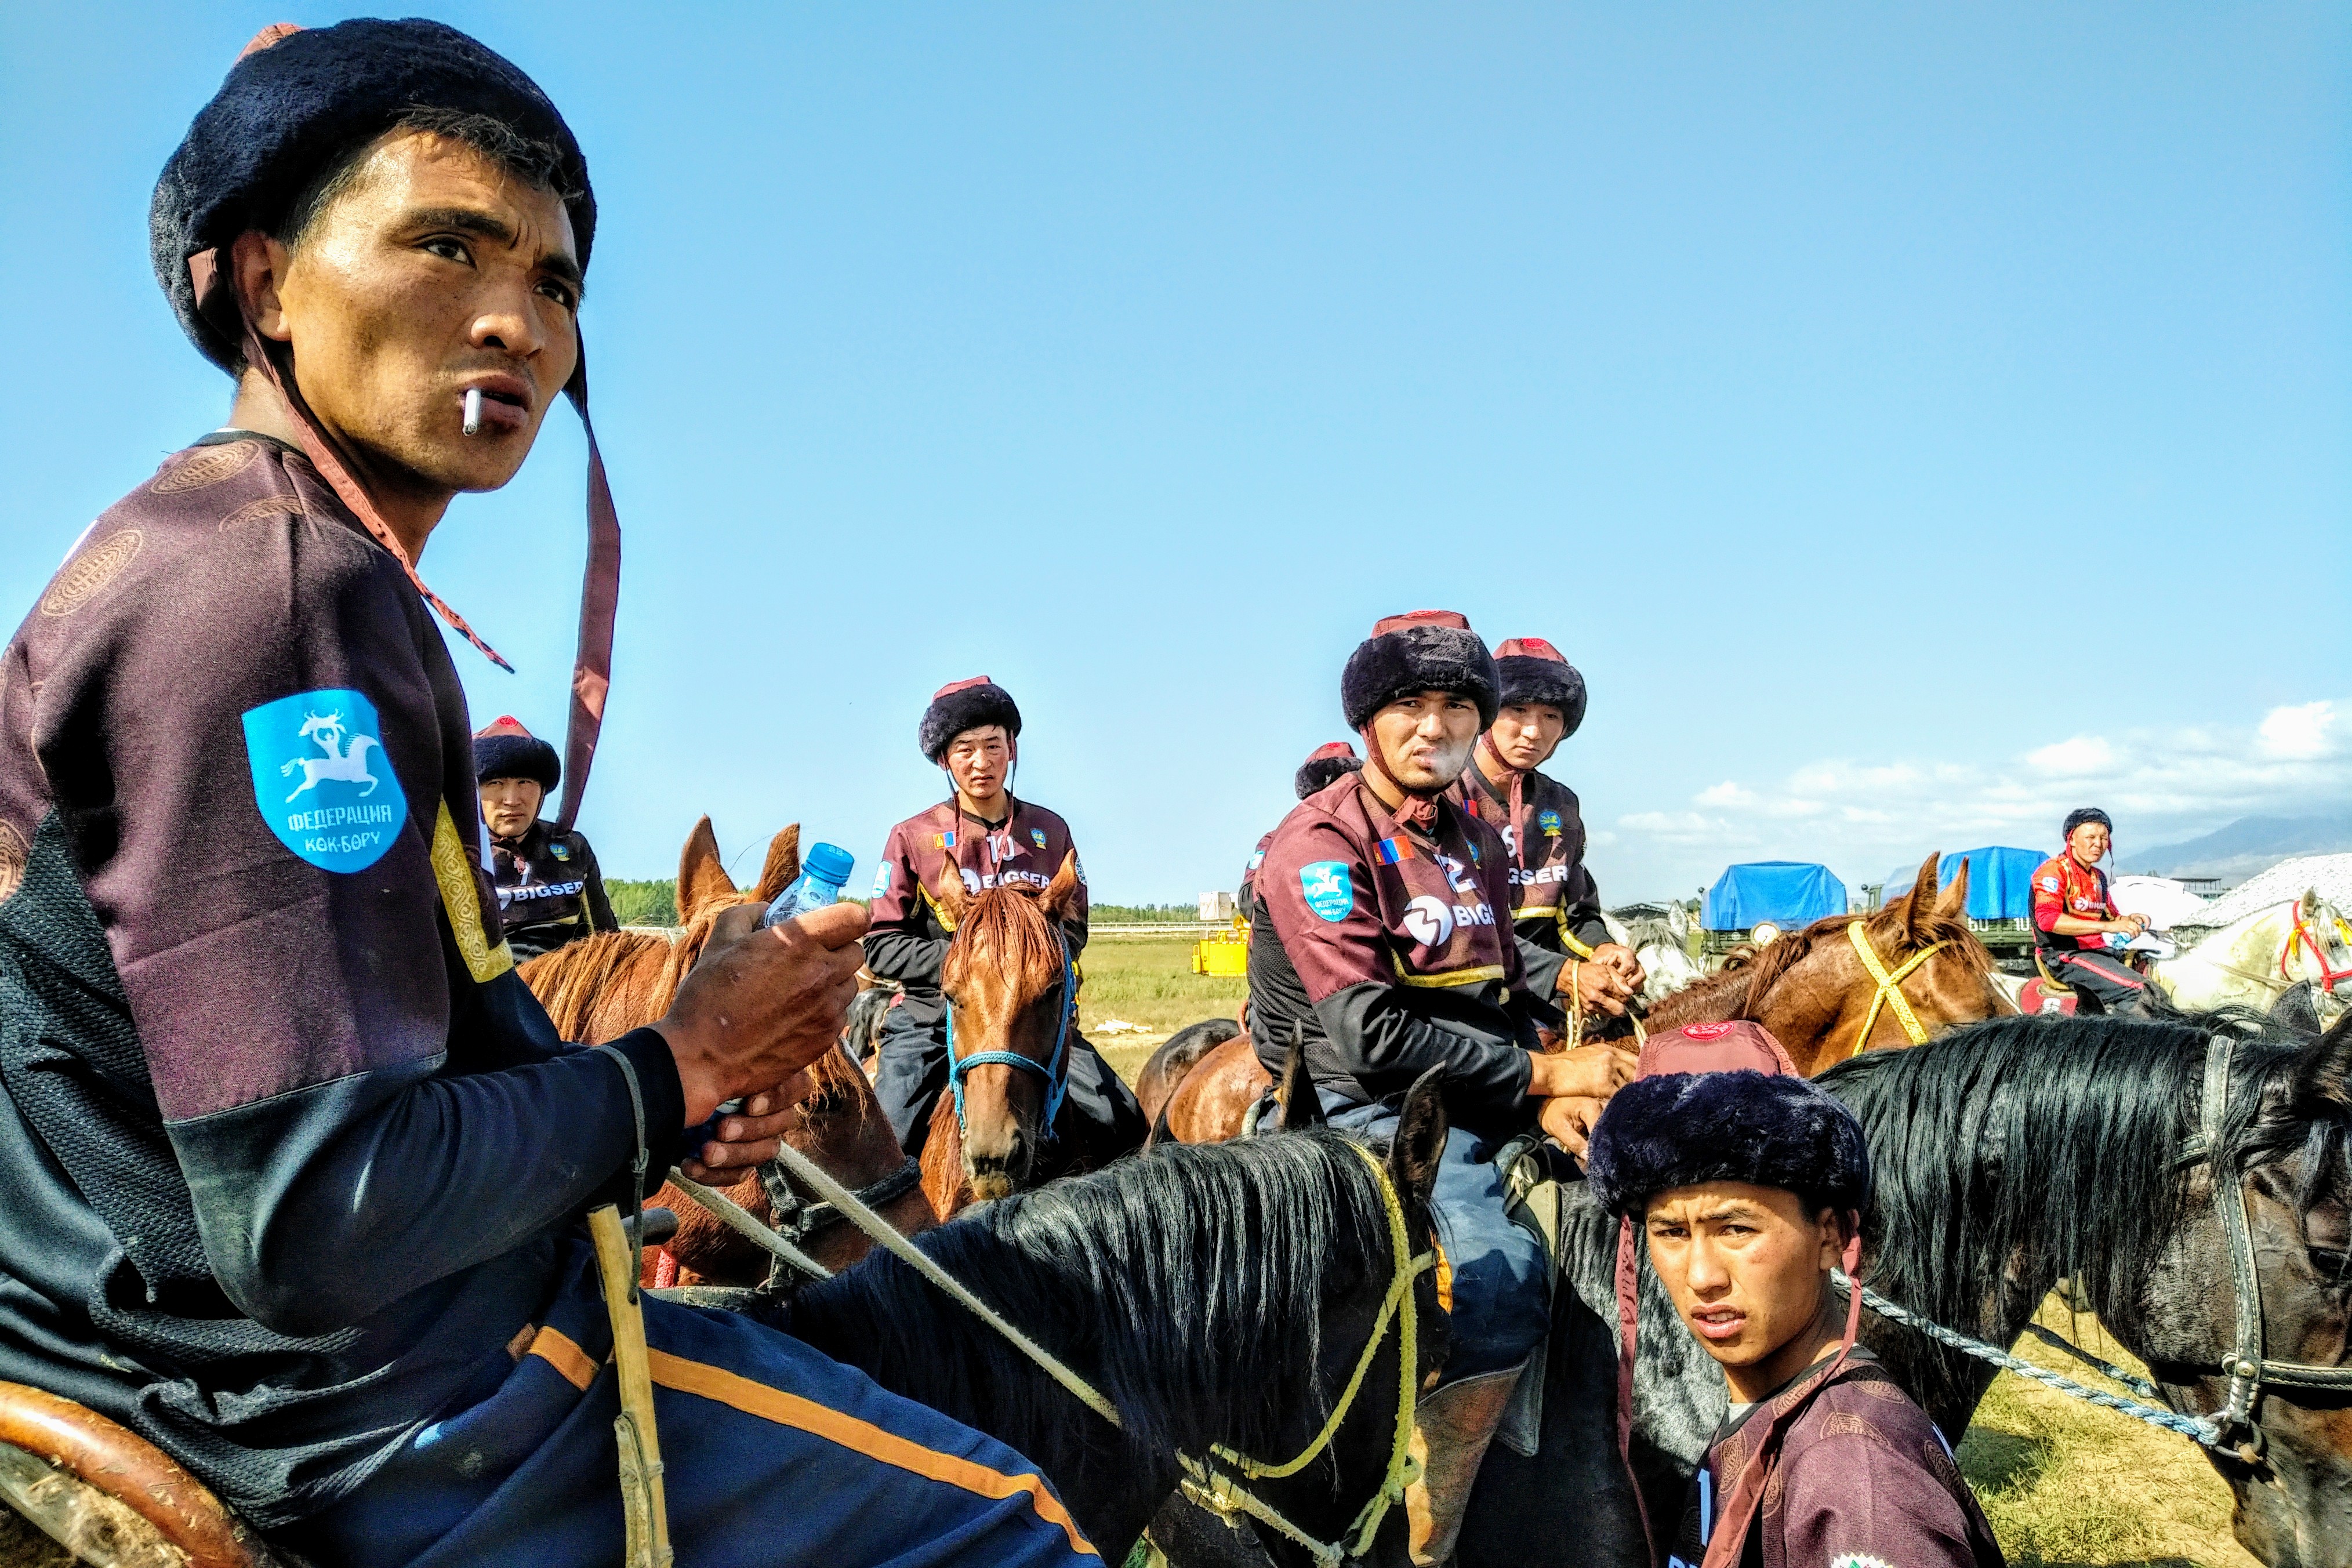 Horses as weapons: the ancient sport of kok boru in Kyrgyzstan